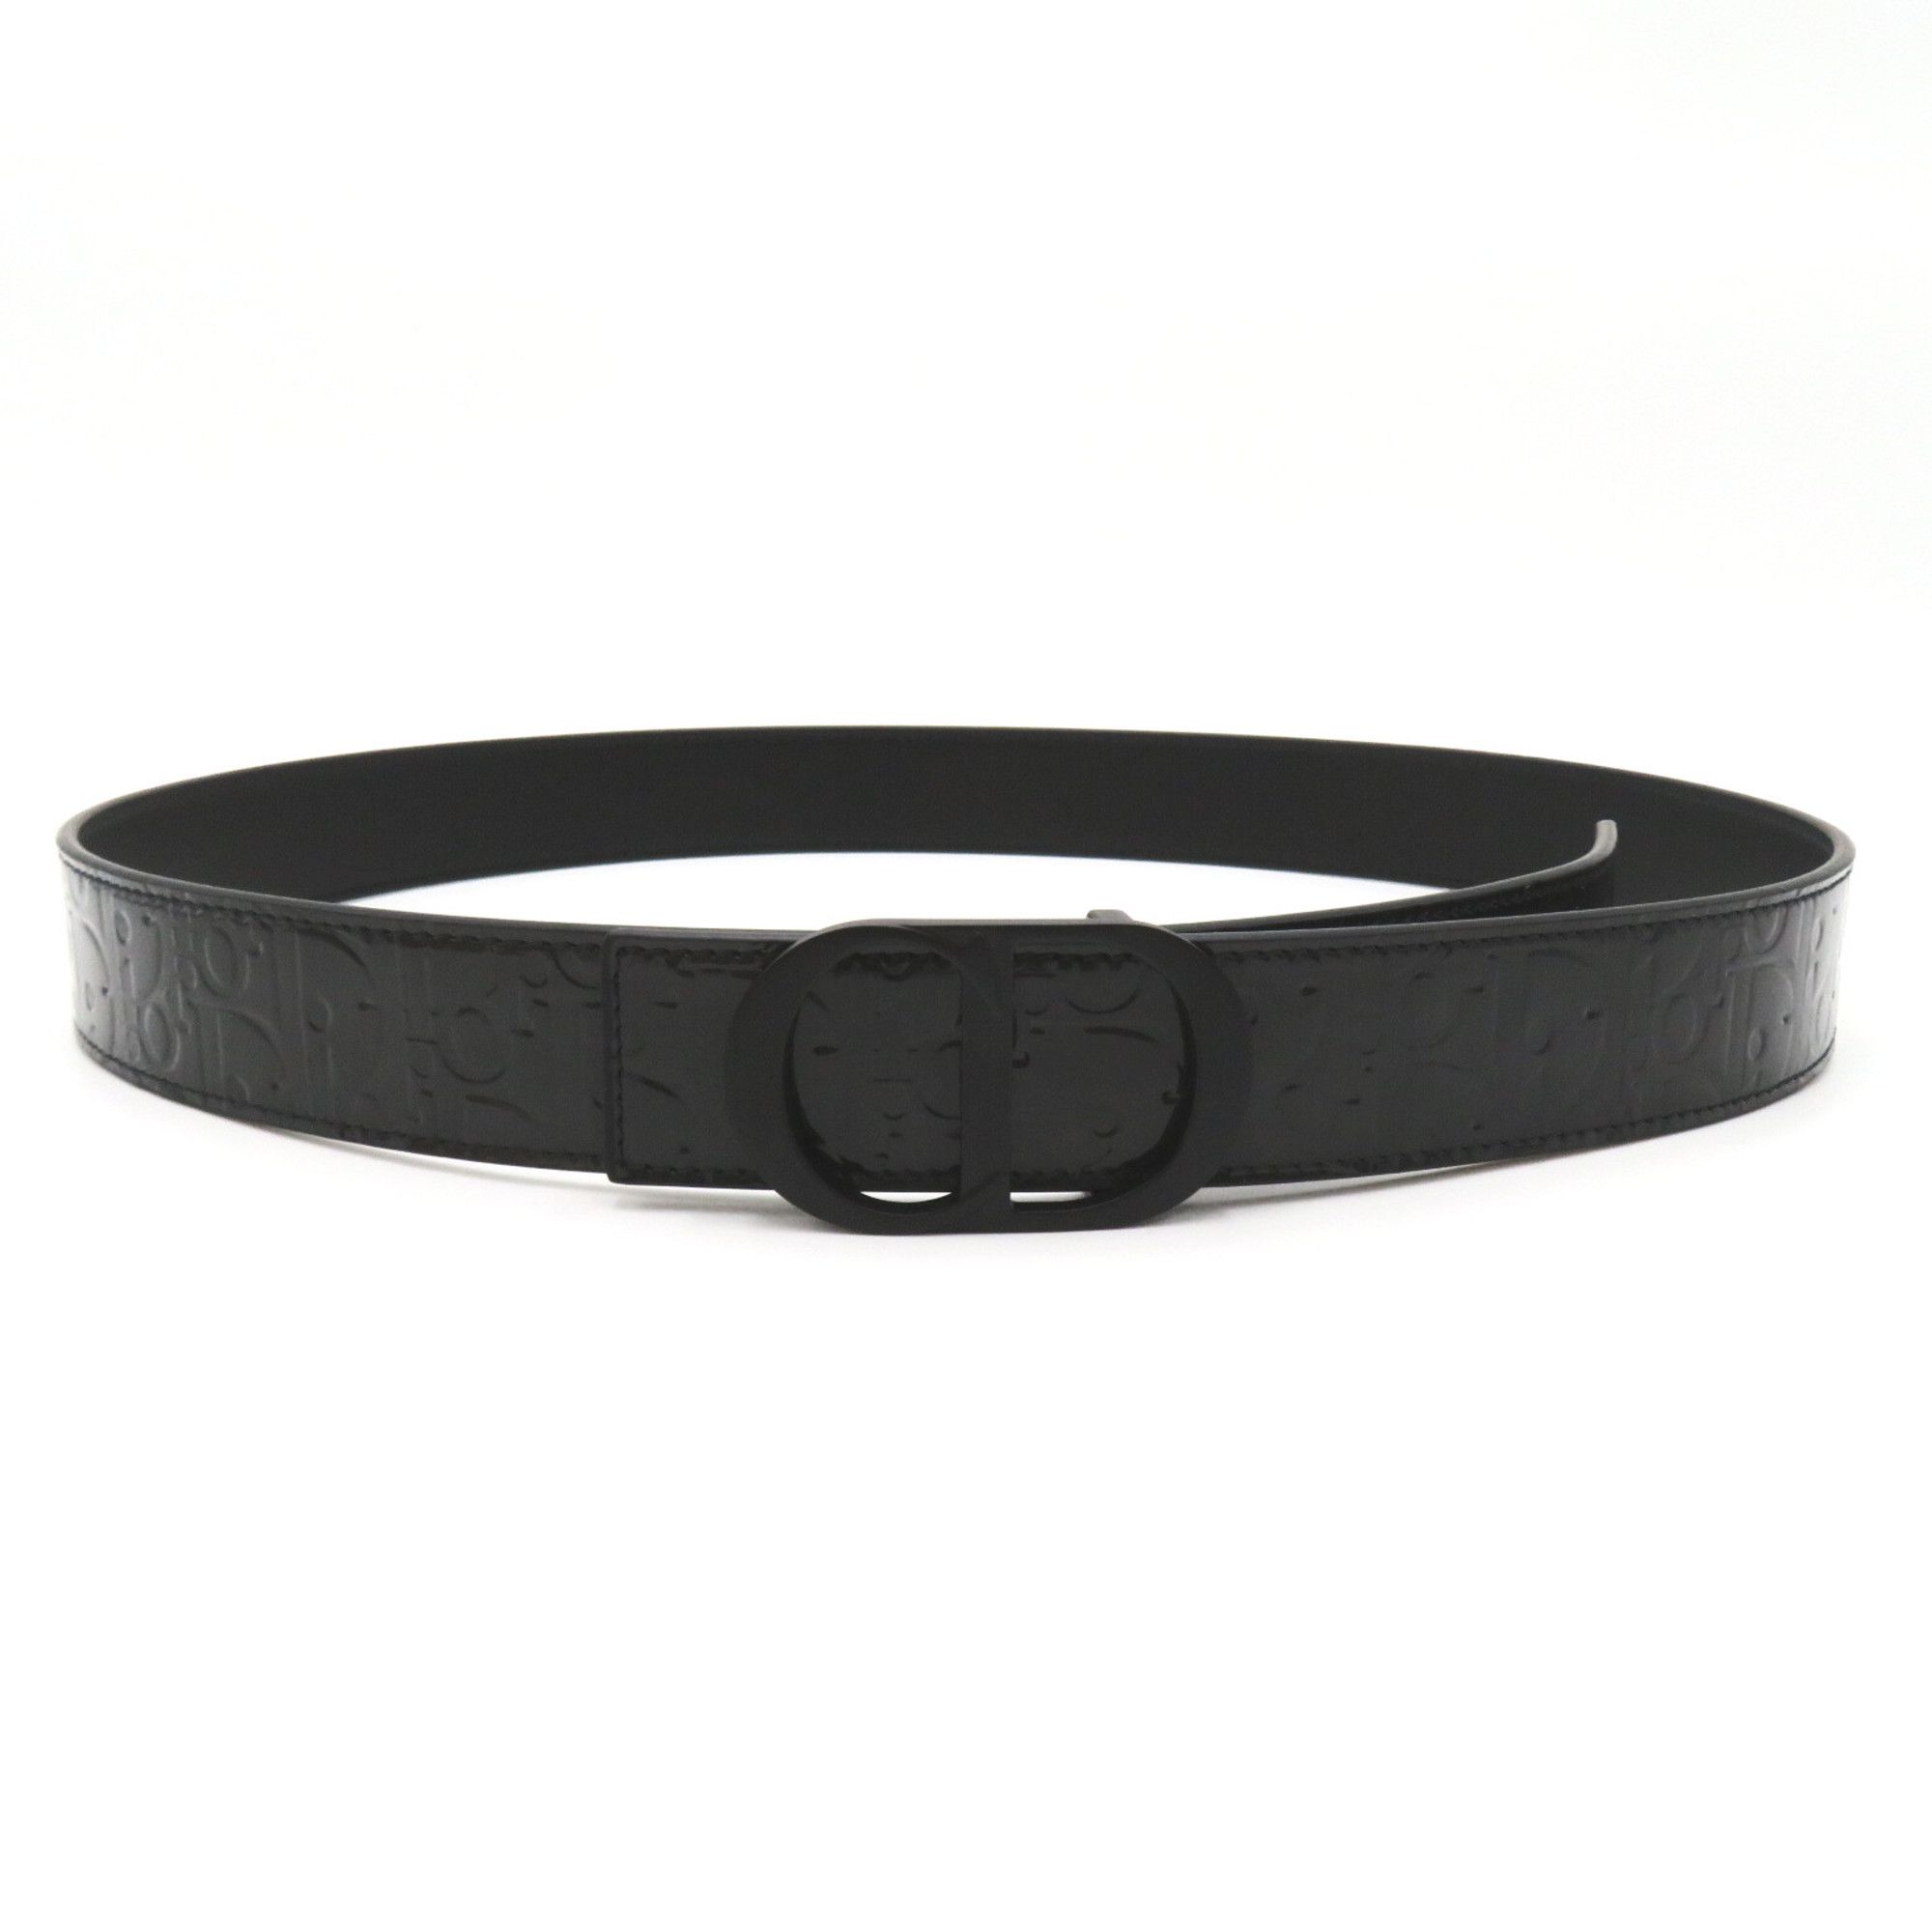 Dior DIOR HOMME belt Black leather Grained calf 4371RVDOVH00N100 | Grailed